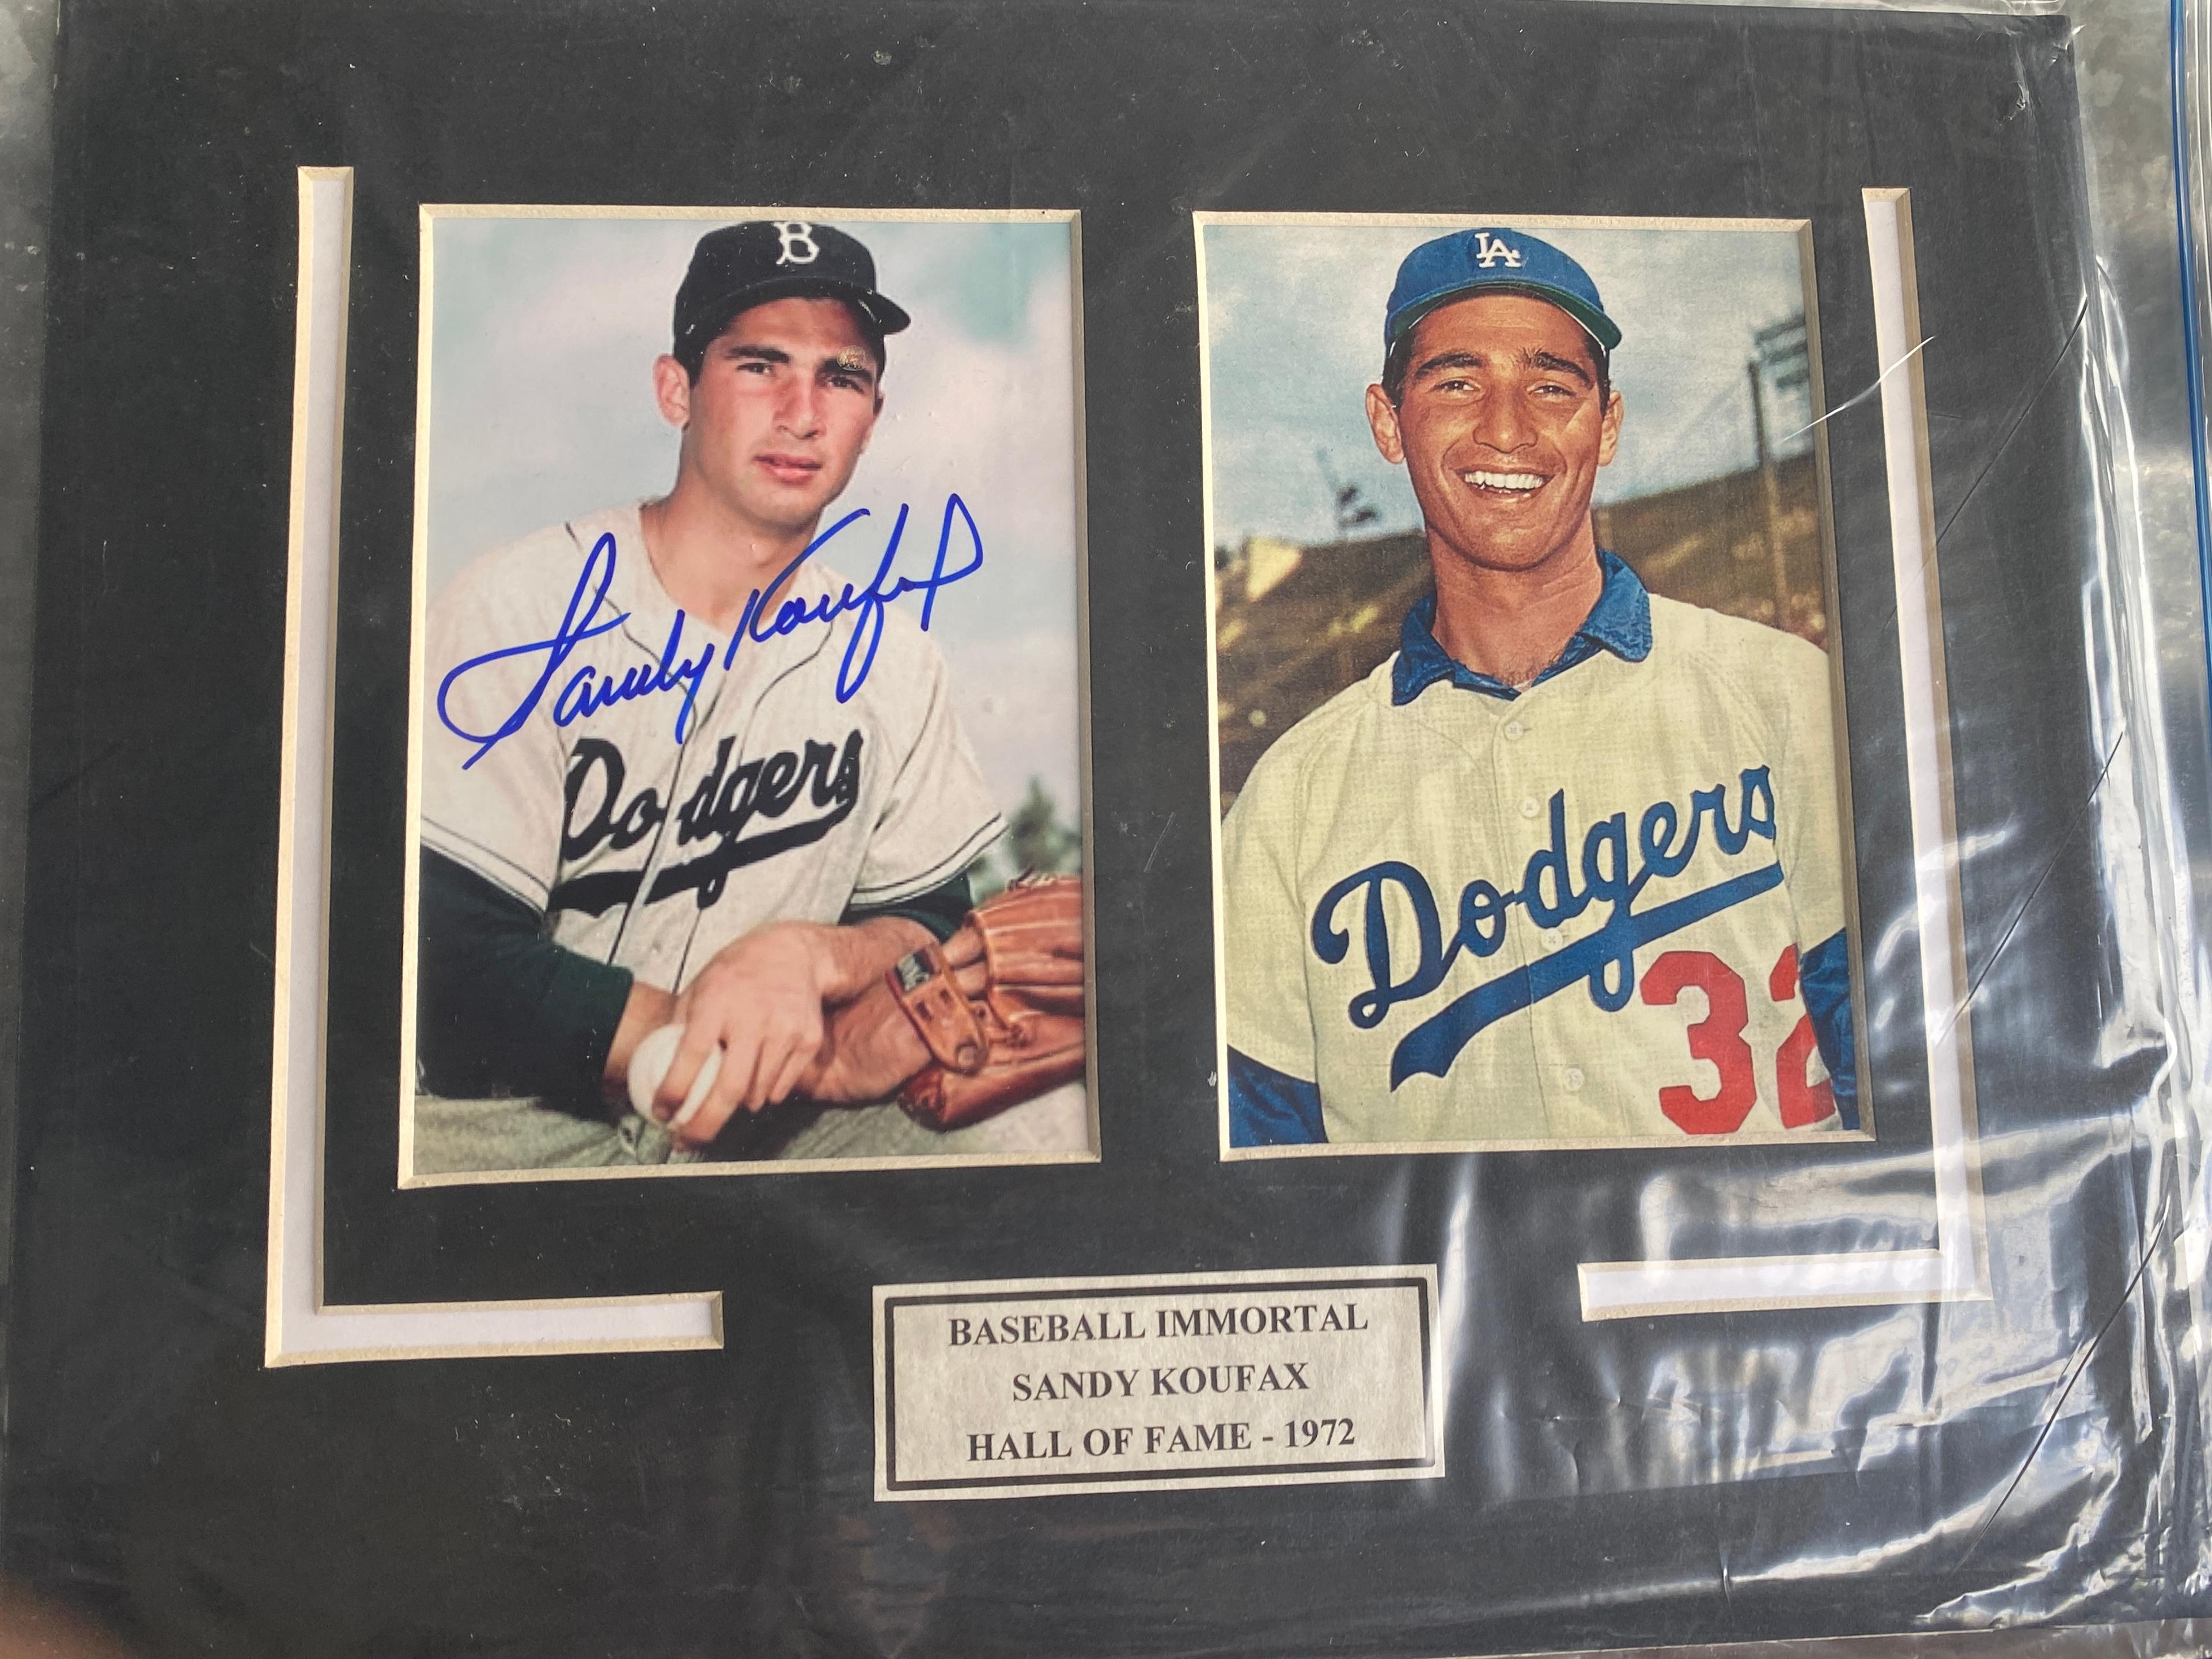 Large Lot of 8” x 10” matted signed photos. The lot consists of Mostly Legendary Baseball Hall of Fa